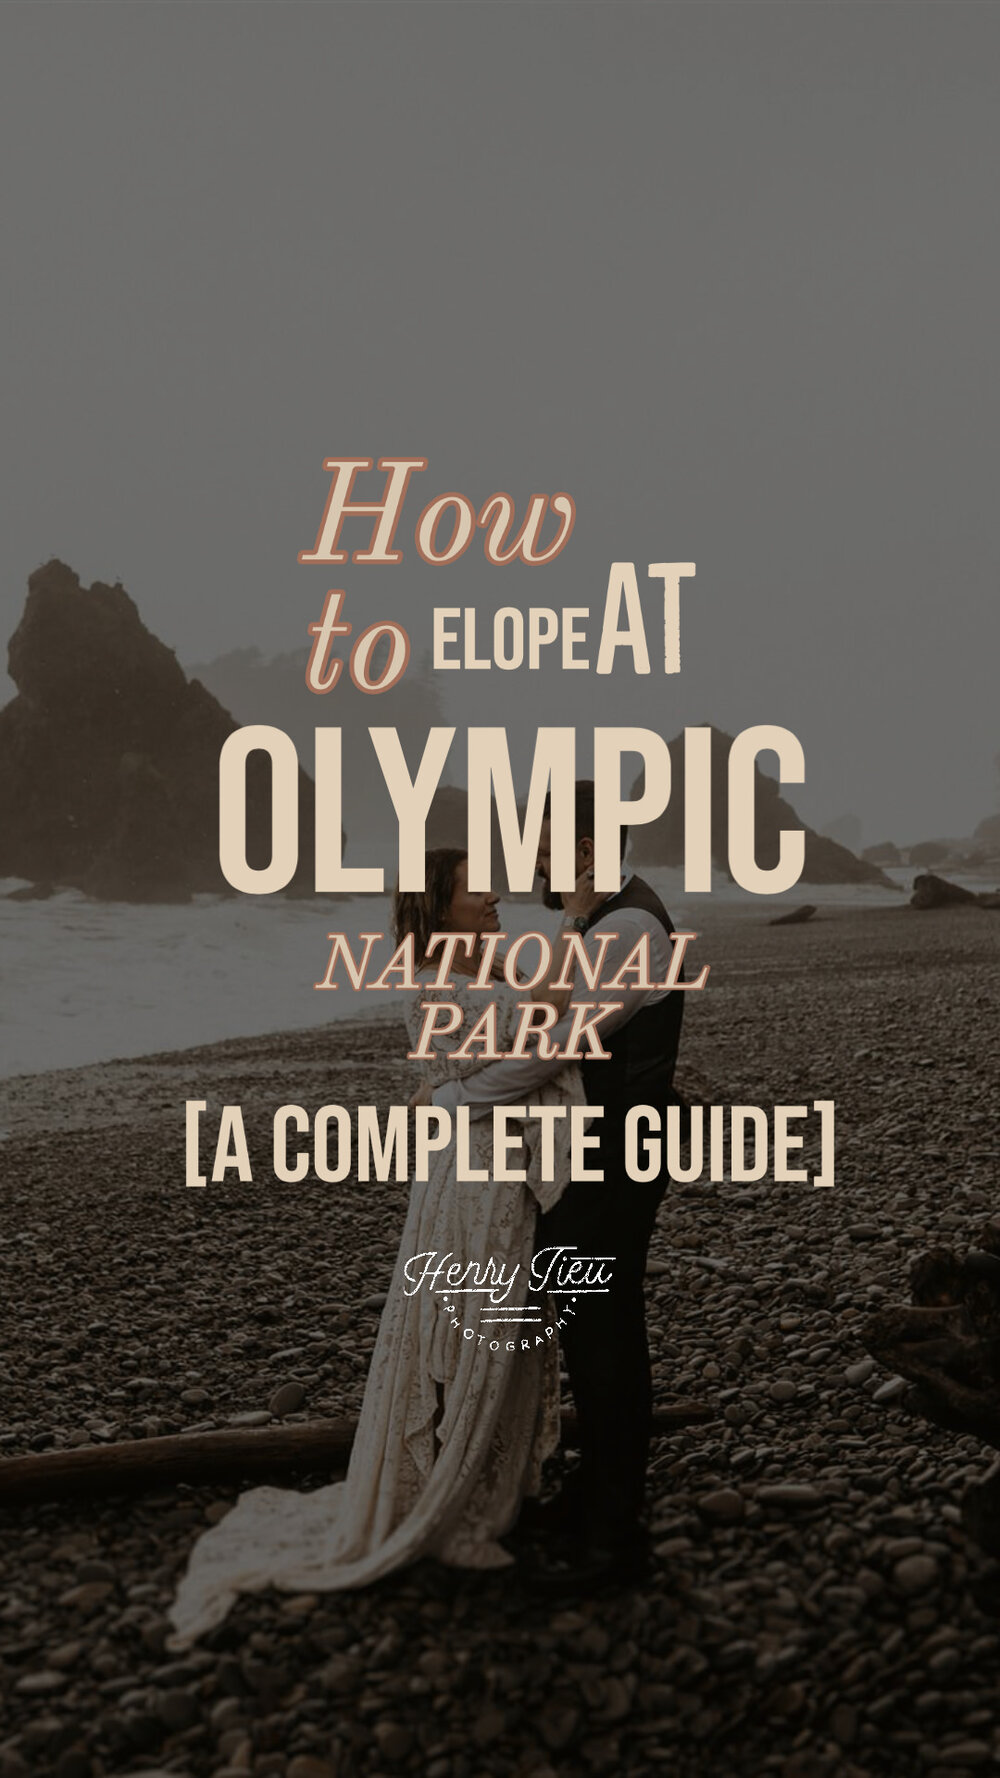 How to elope at Olympic National Park Guide